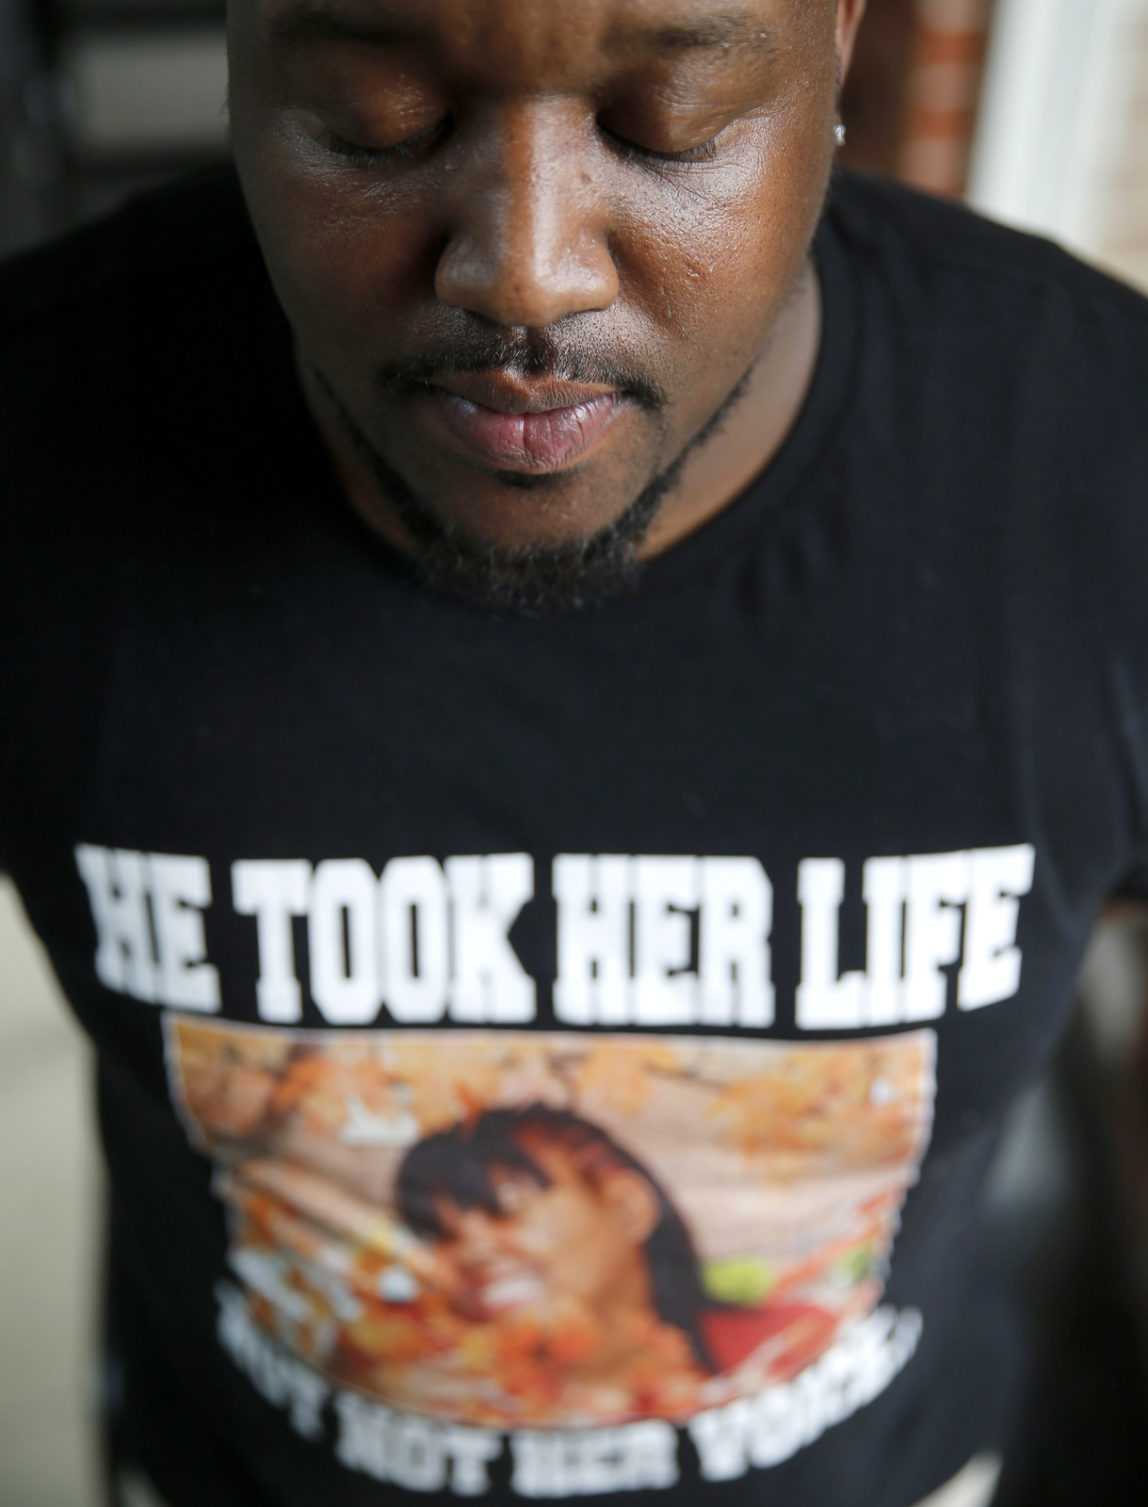 In this March 4, 2016 photo, Martinez Sutton wears a shirt commemorating his sister, Rekia Boyd, 22, who was shot and killed in 2012 by a Chicago police officer. Sutton has been pushing for the firing of officer Dante Servin, who, while off-duty, was driving in an alley when he argued with a group of people. Servin fired several shots over his shoulder, striking a Boyd with a fatal head wound. (AP Photo/Charles Rex Arbogast)